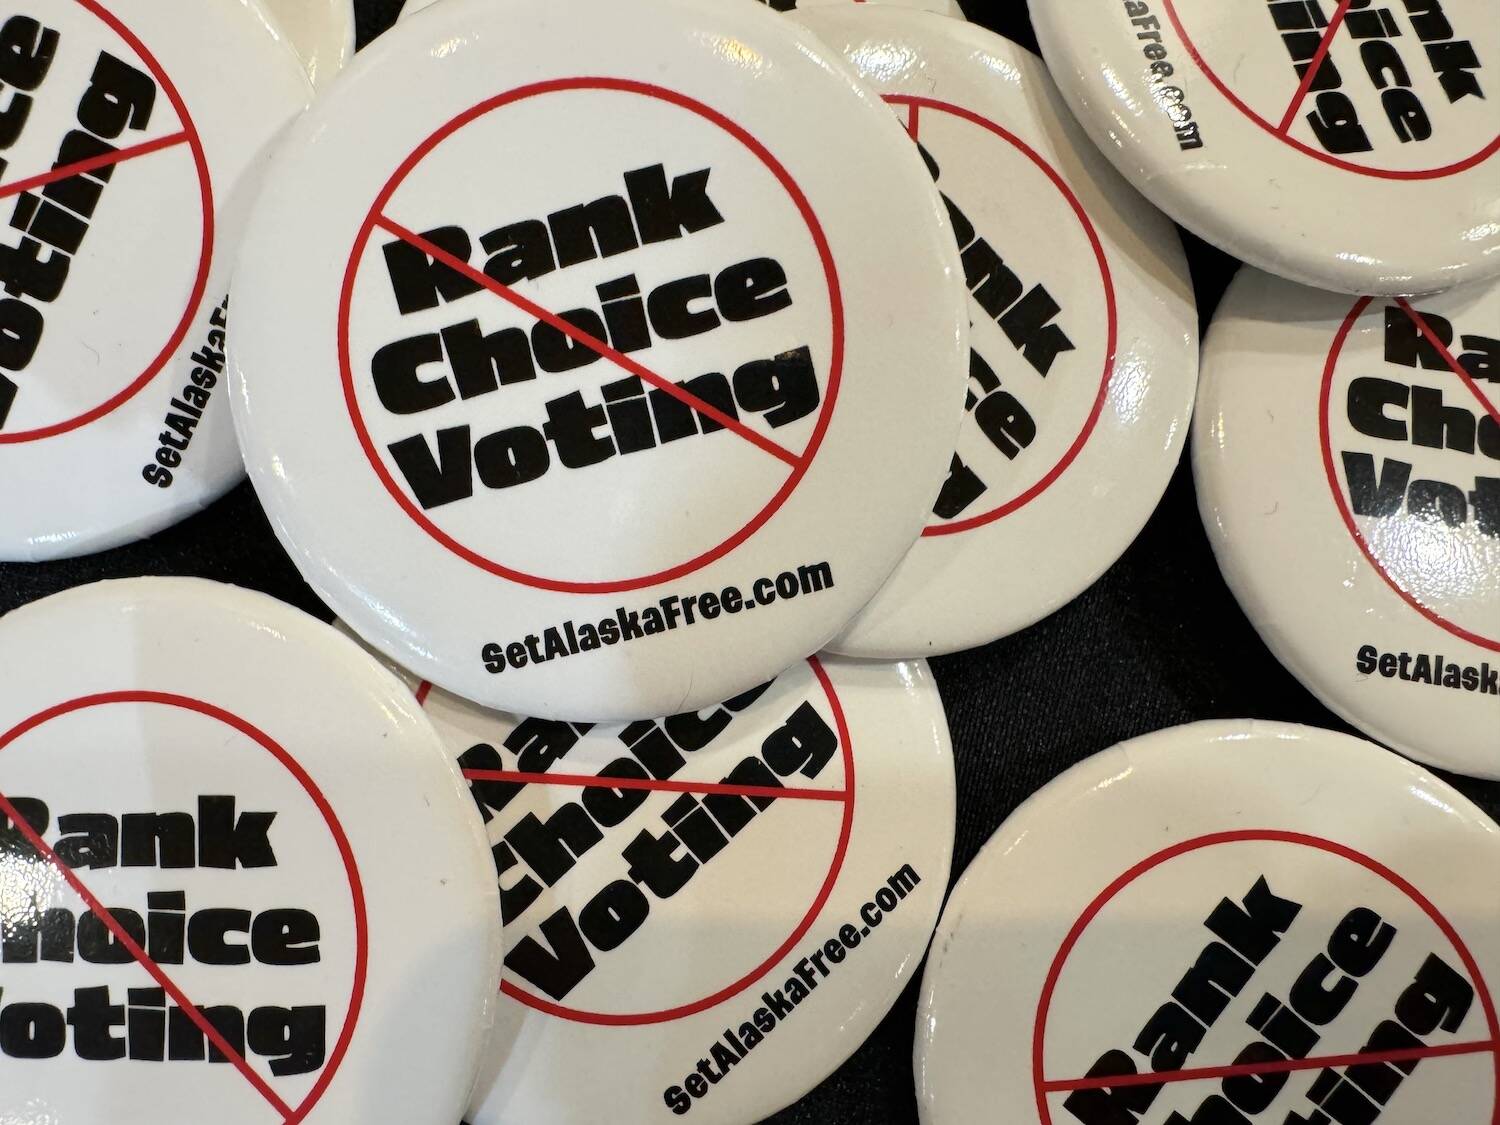 Pins supporting the repeal of ranked choice voting are seen on April 20 at the Republican state convention in Anchorage. (James Brooks/Alaska Beacon)